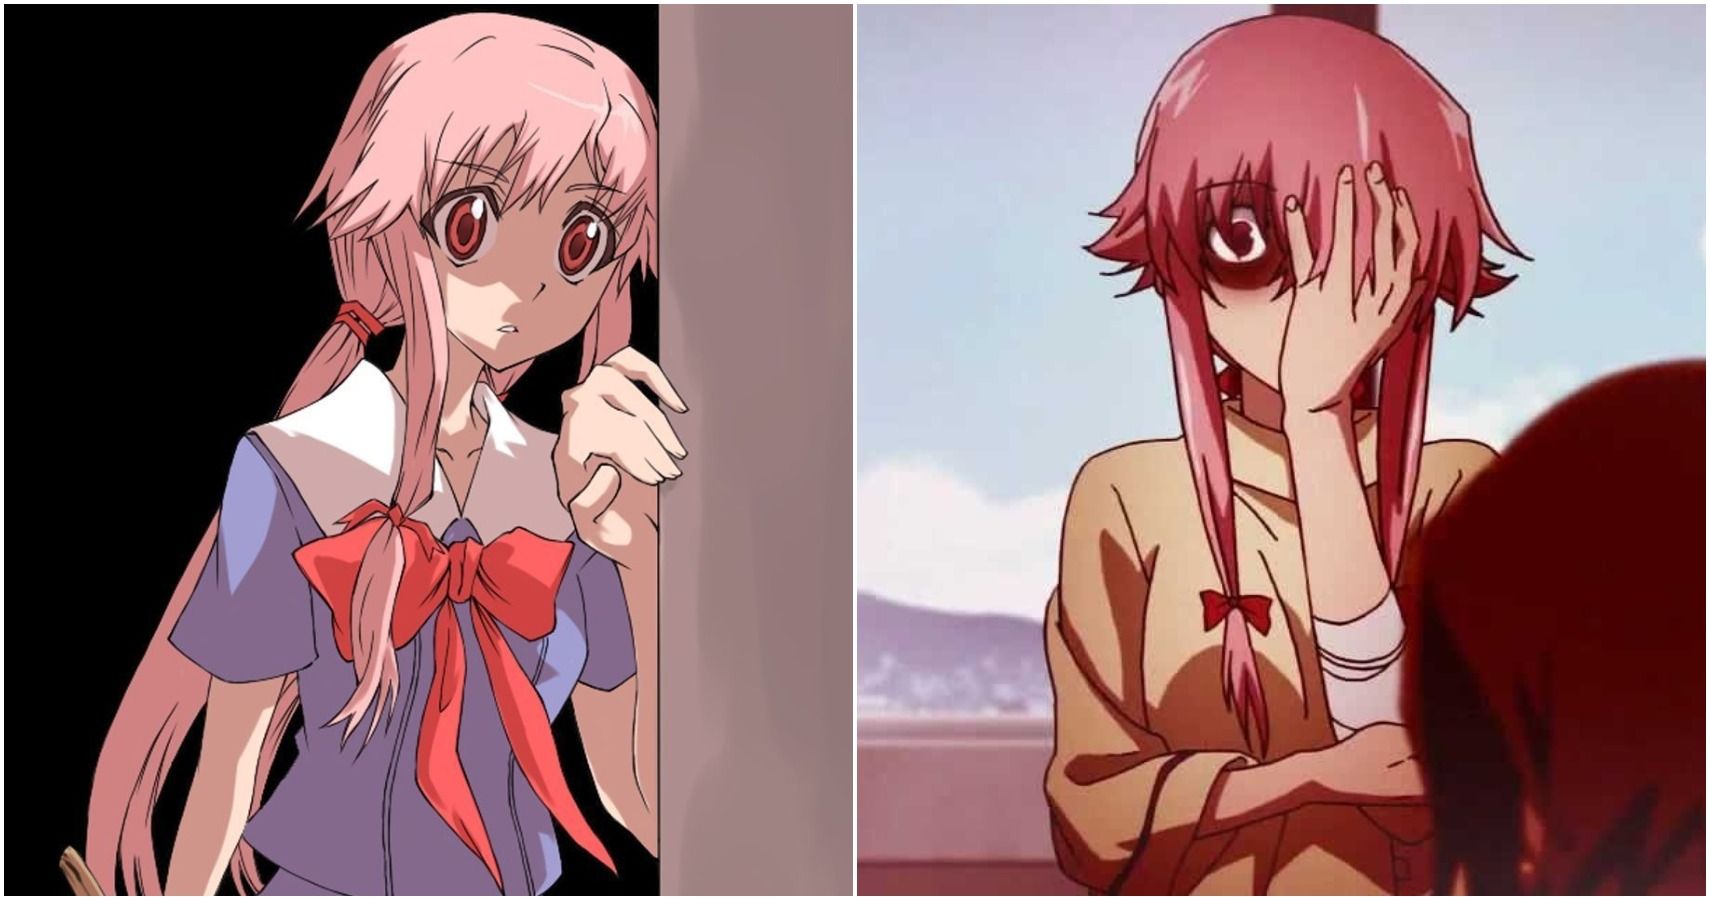 What is the ending of Mirai Nikki? I don't understand. Is Yuno